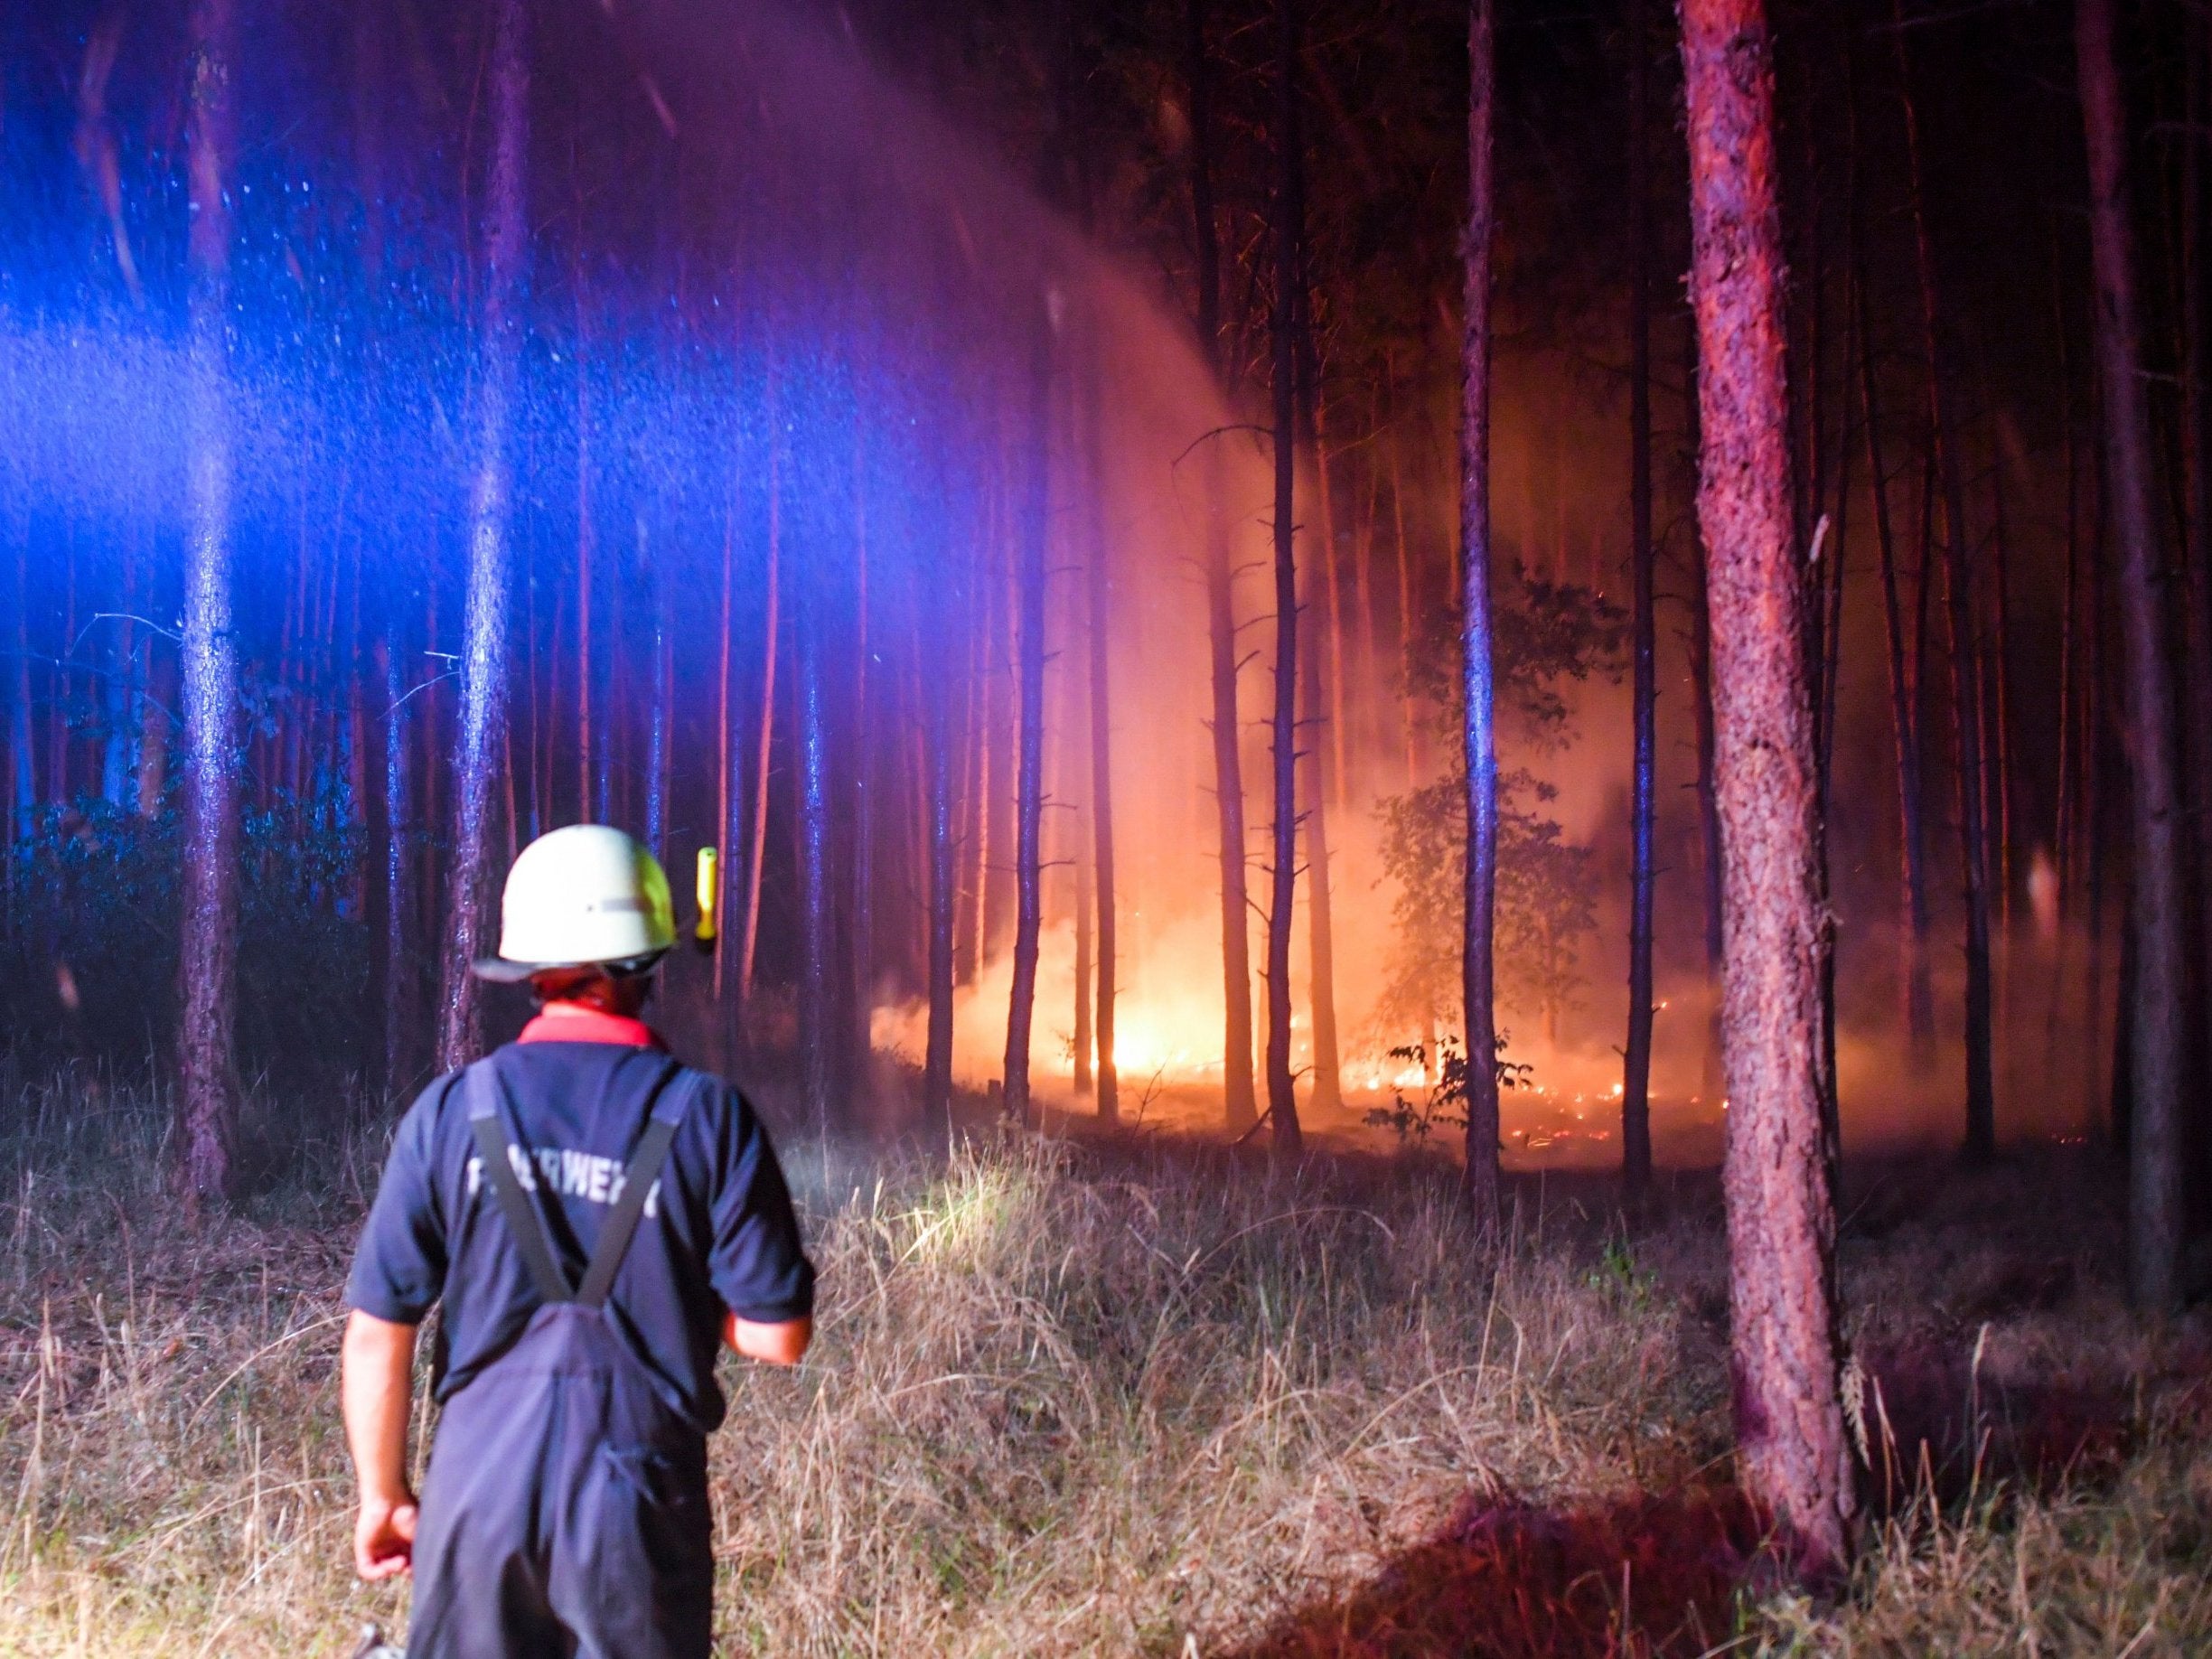 Firefighters battle a wildfire near the village Klausdorf, about 53 miles south of Berlin